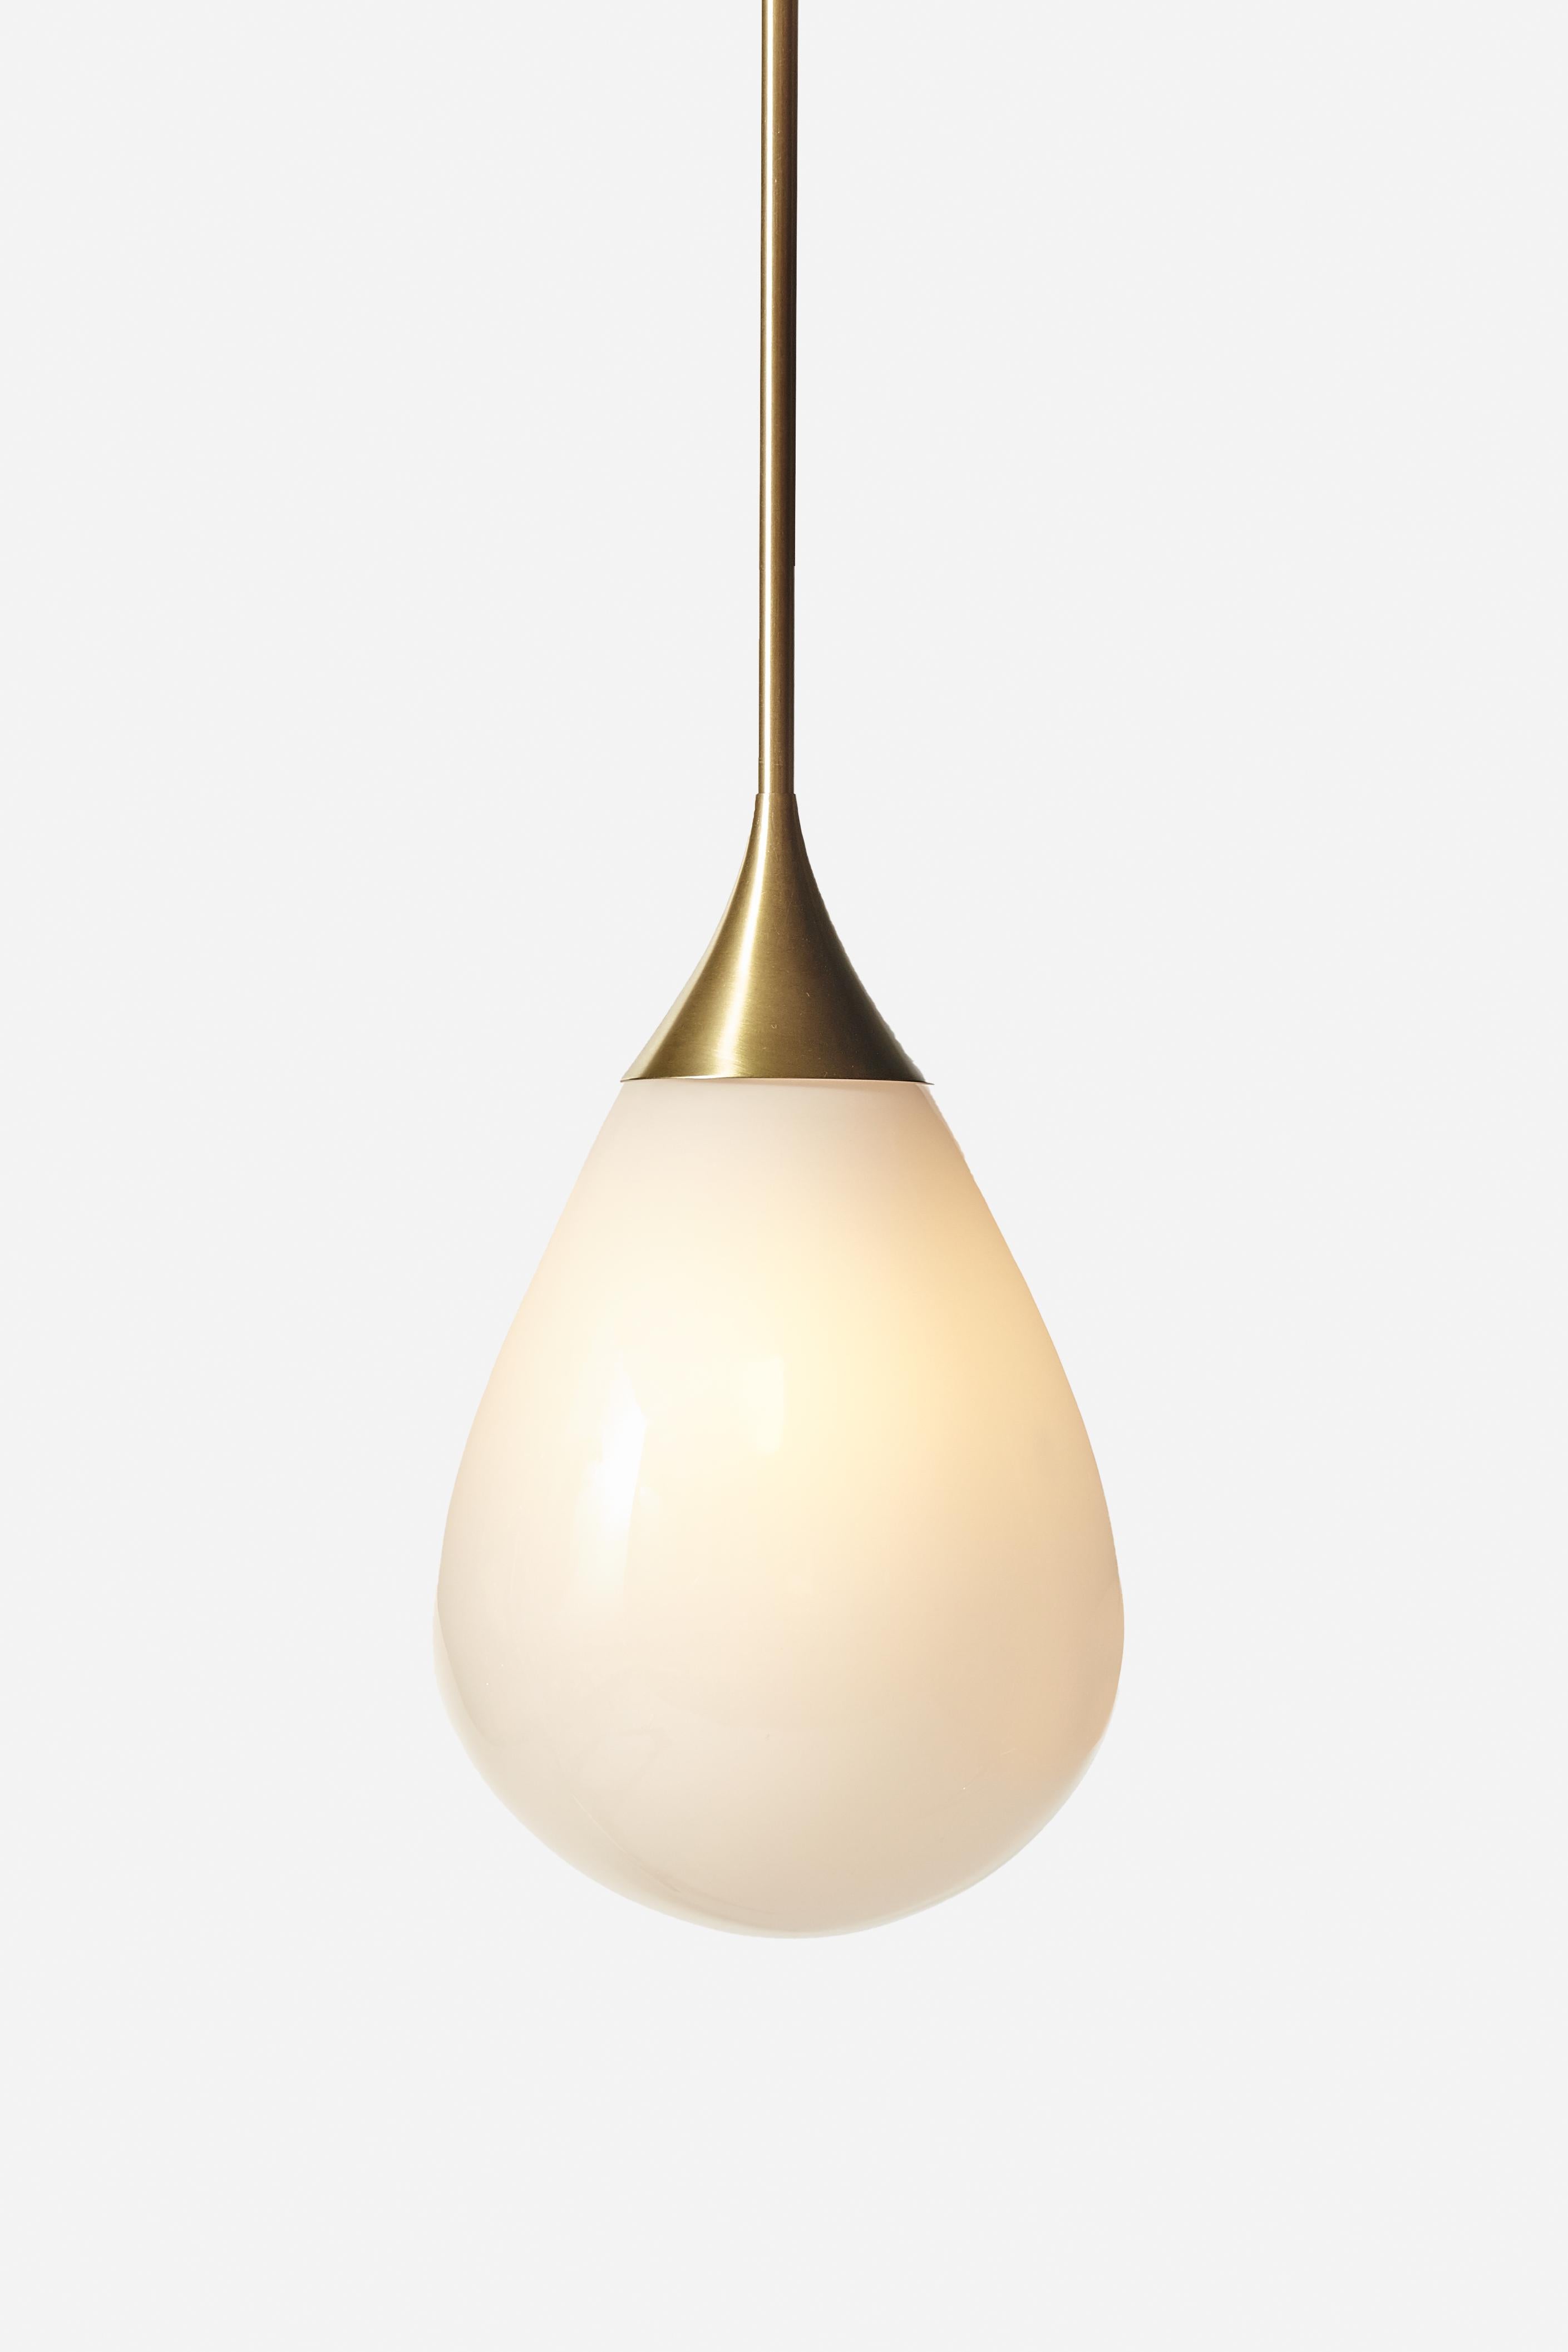 A carefully crafted, hand blown glass pendant hangs from spun brass for an elongated and elegant tear-drop shape. Also available as a cluster of three or five.

Metal finish:
Satin brass, oil-rubbed bronze, antique brass, satin nickel, antique